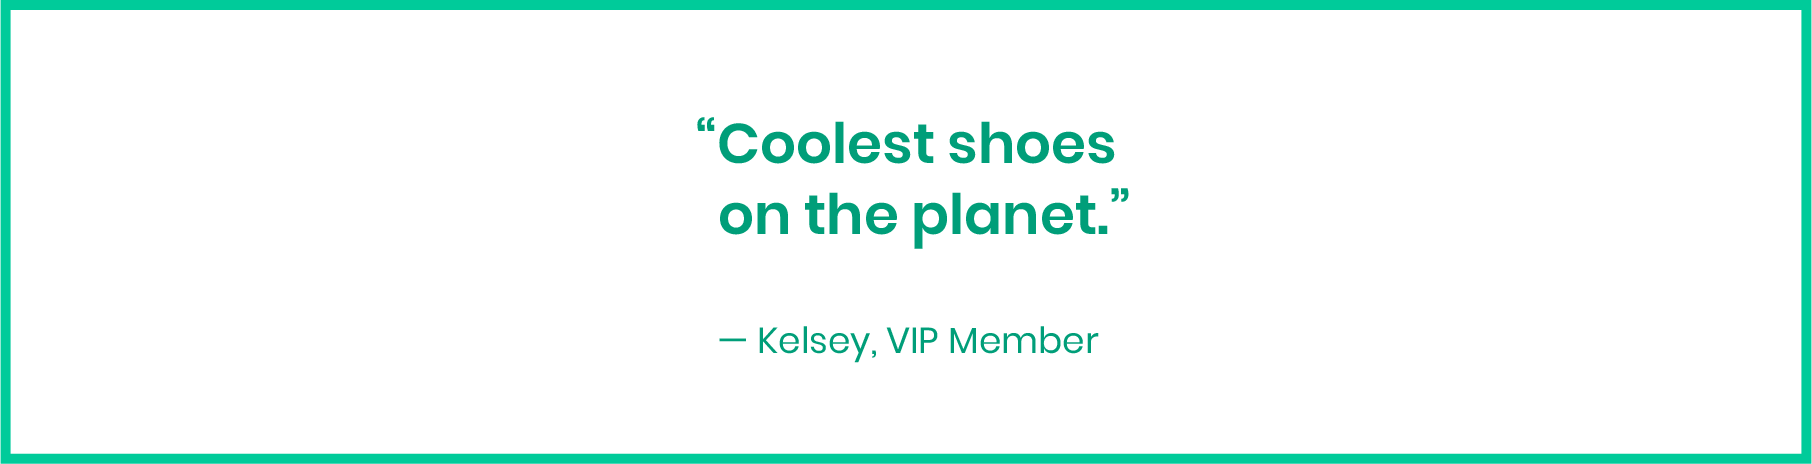 Cute shoes and an amazing price! Kid approved and mom loves it! - Amber, VIP Member